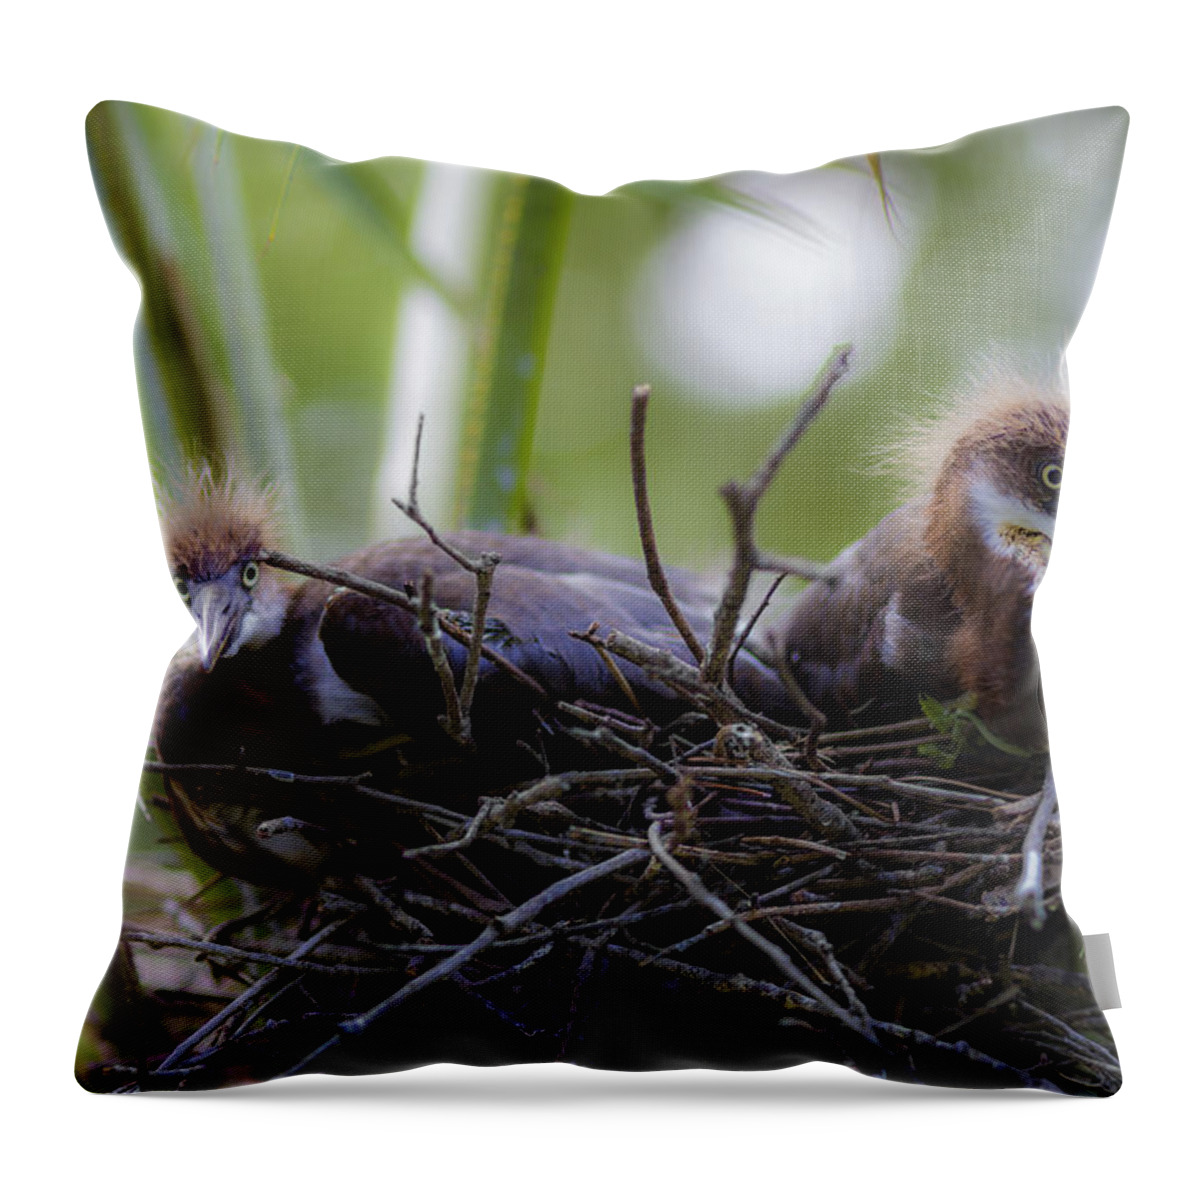 Lowry Park Zoo Throw Pillow featuring the photograph A Fresh Start by Stephen Brown